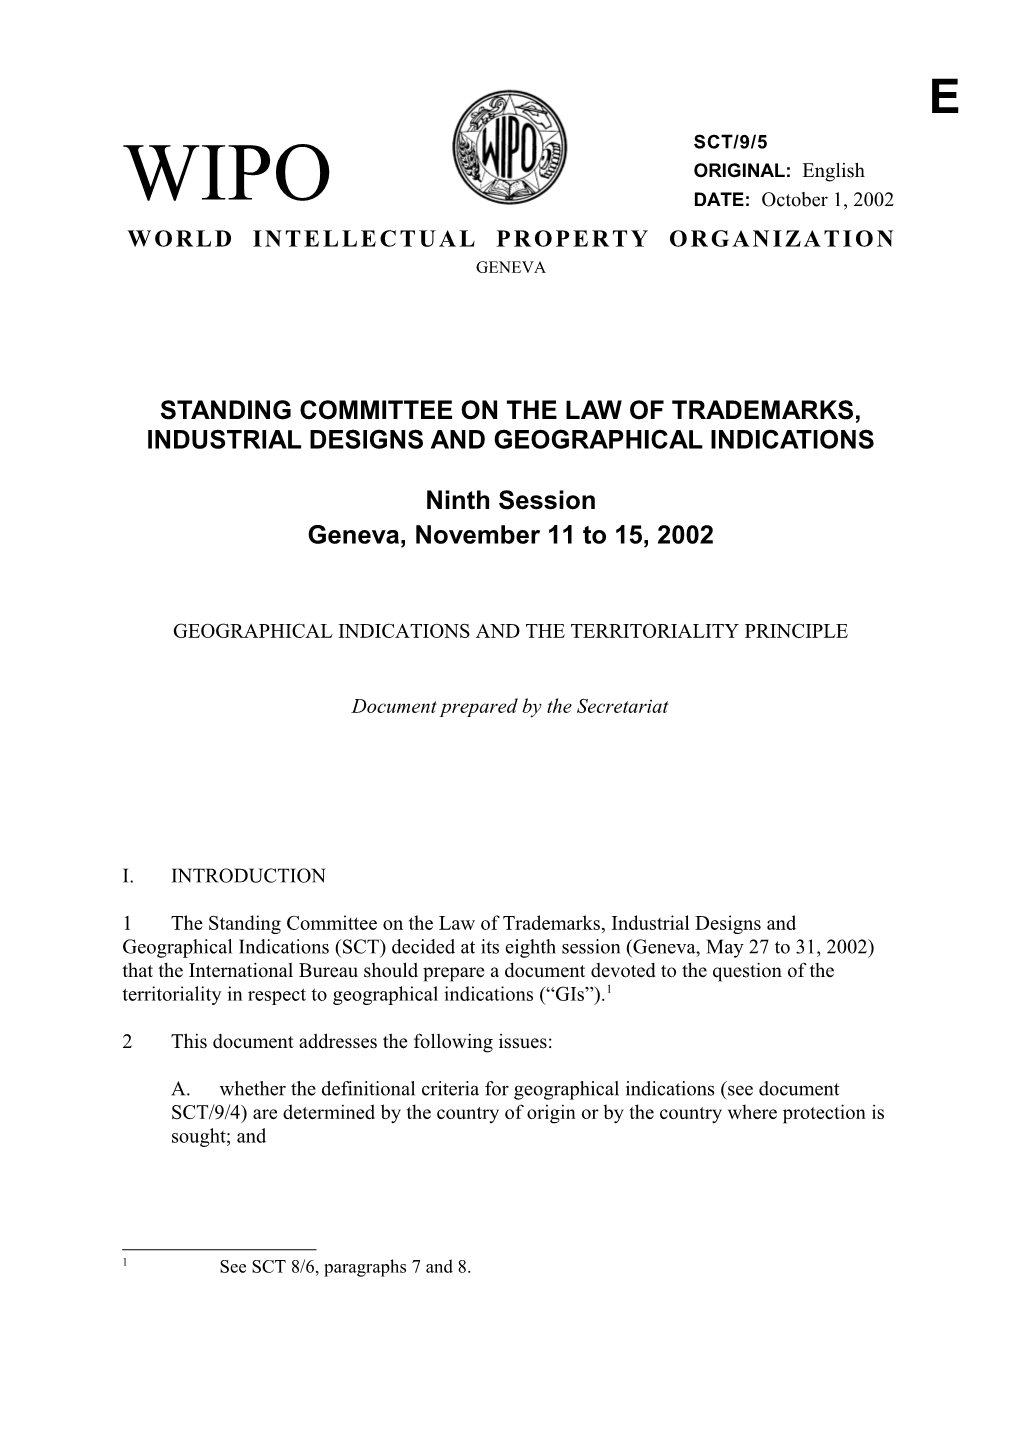 SCT/9/5: Geographical Indications and the Territoriality Principle